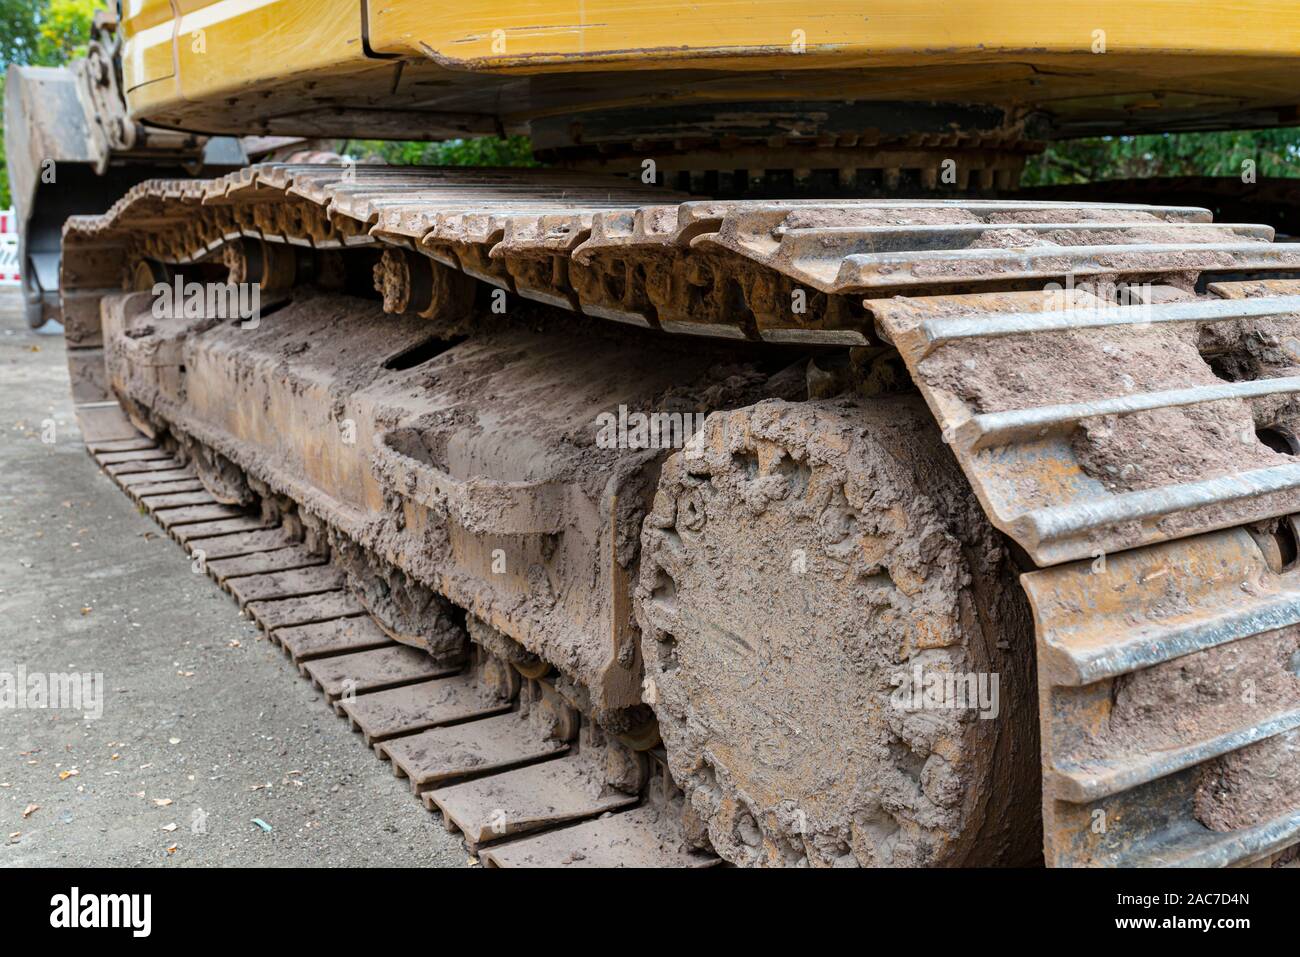 Metal track drive of a large excavator, visible up close. Stock Photo